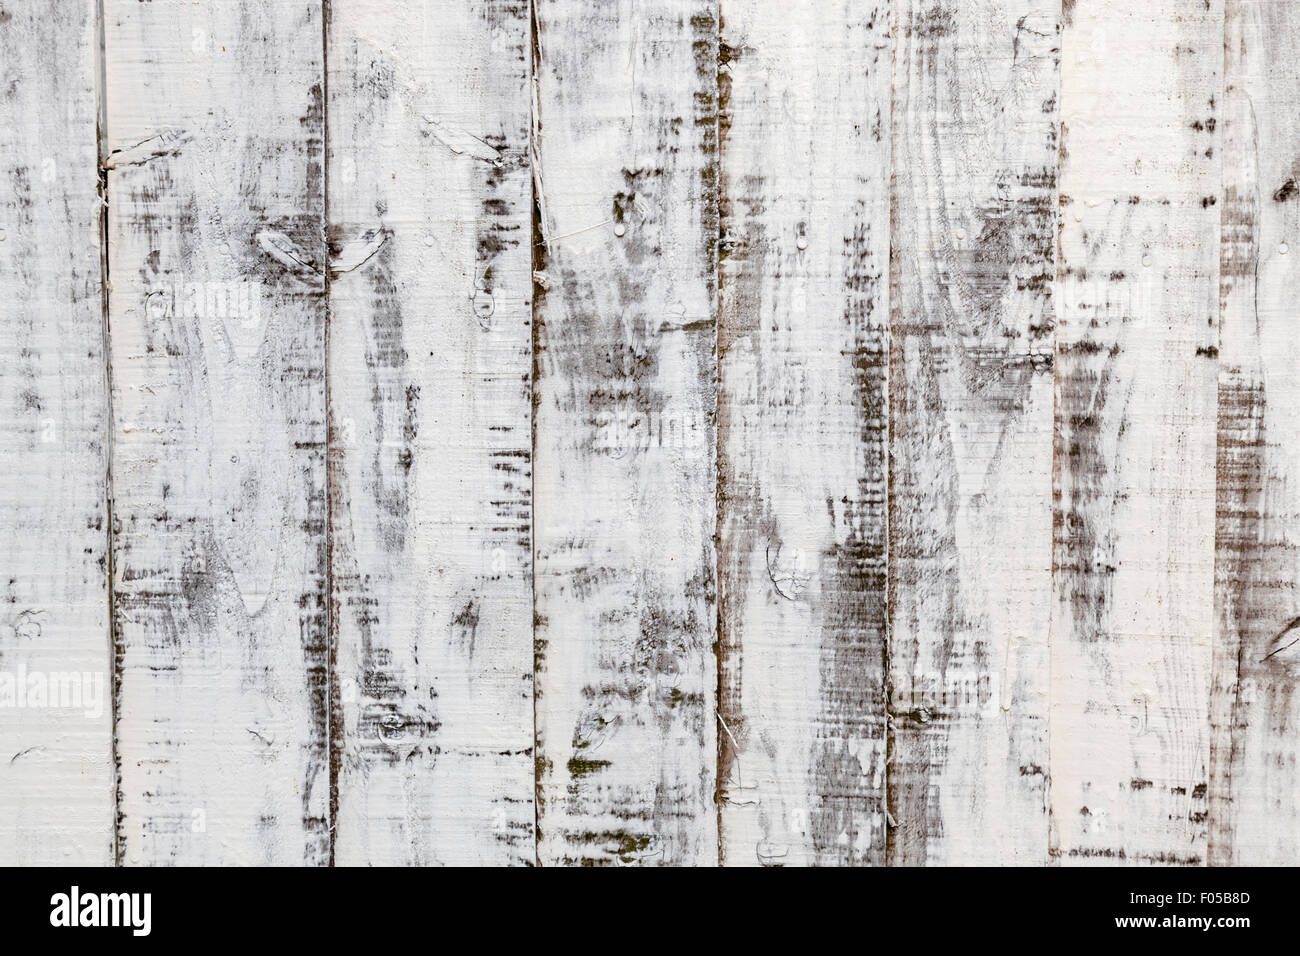 Weathered wood background: distressed paint on an old wooden fence Stock Photo